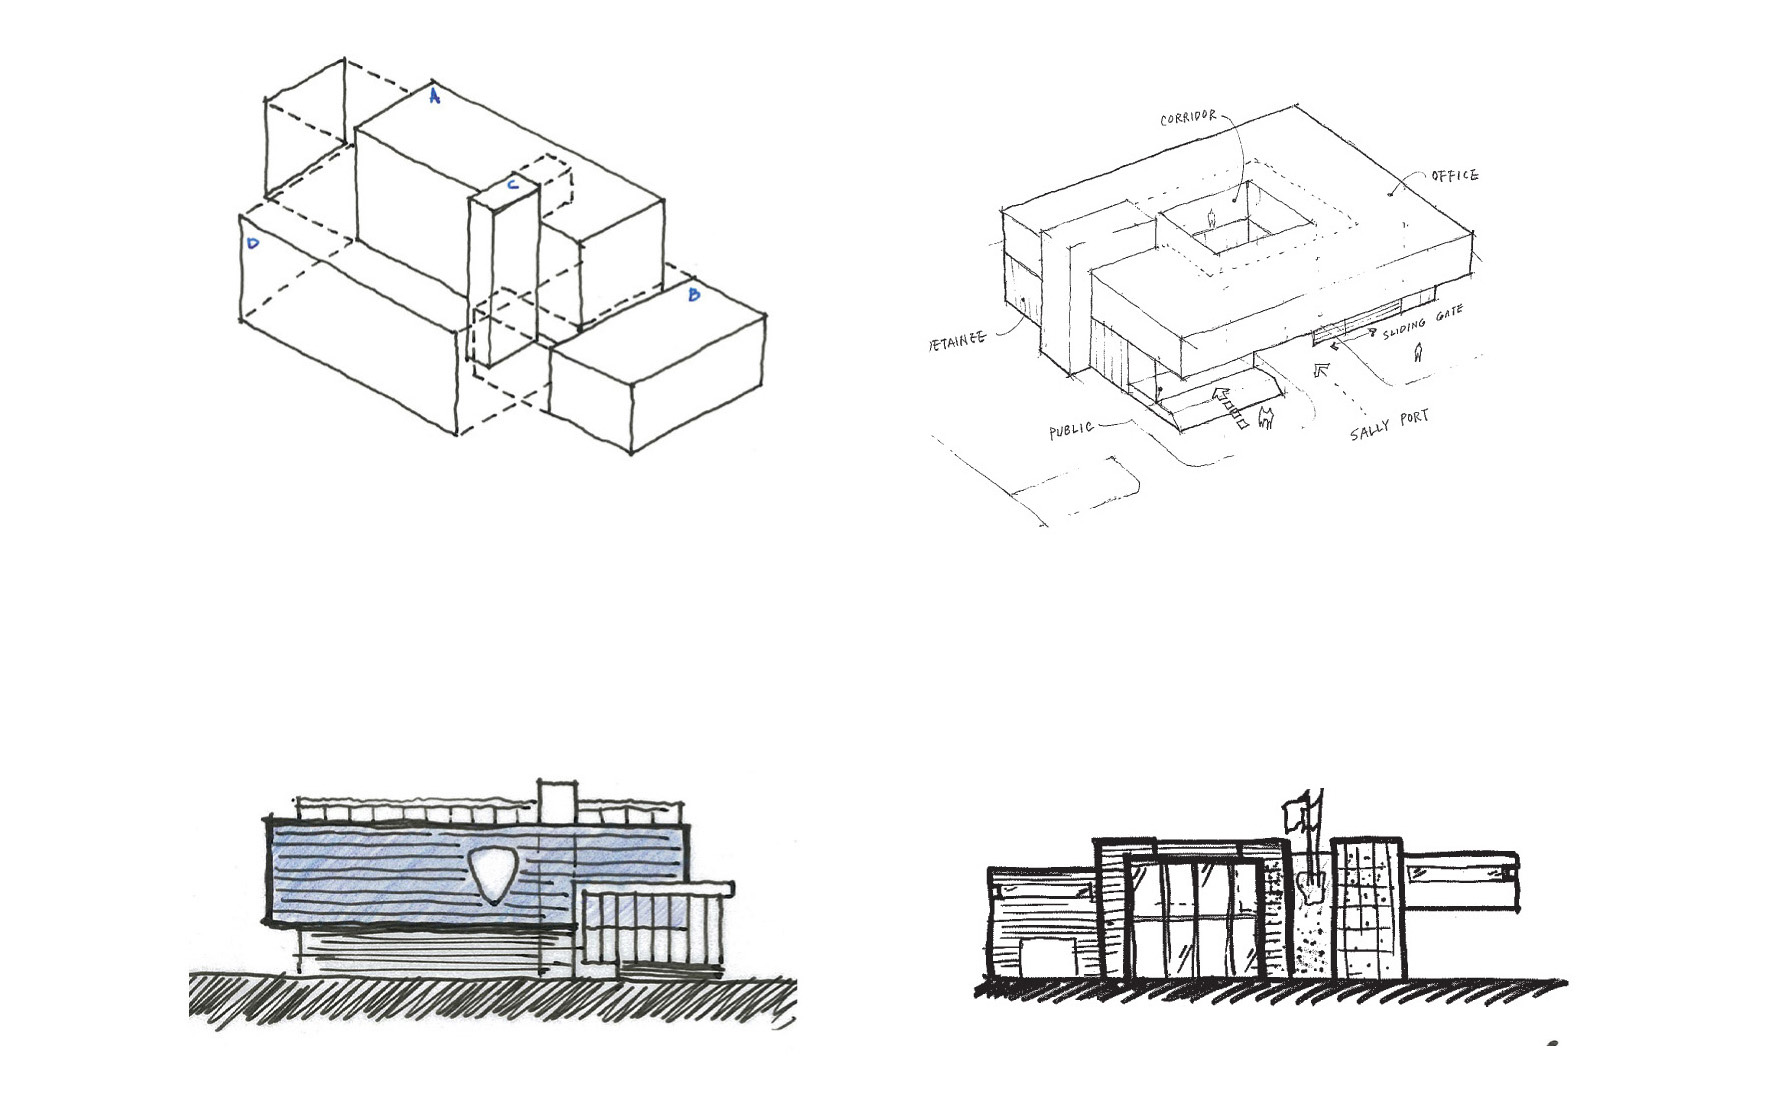 Drawings of the police facility during the design process